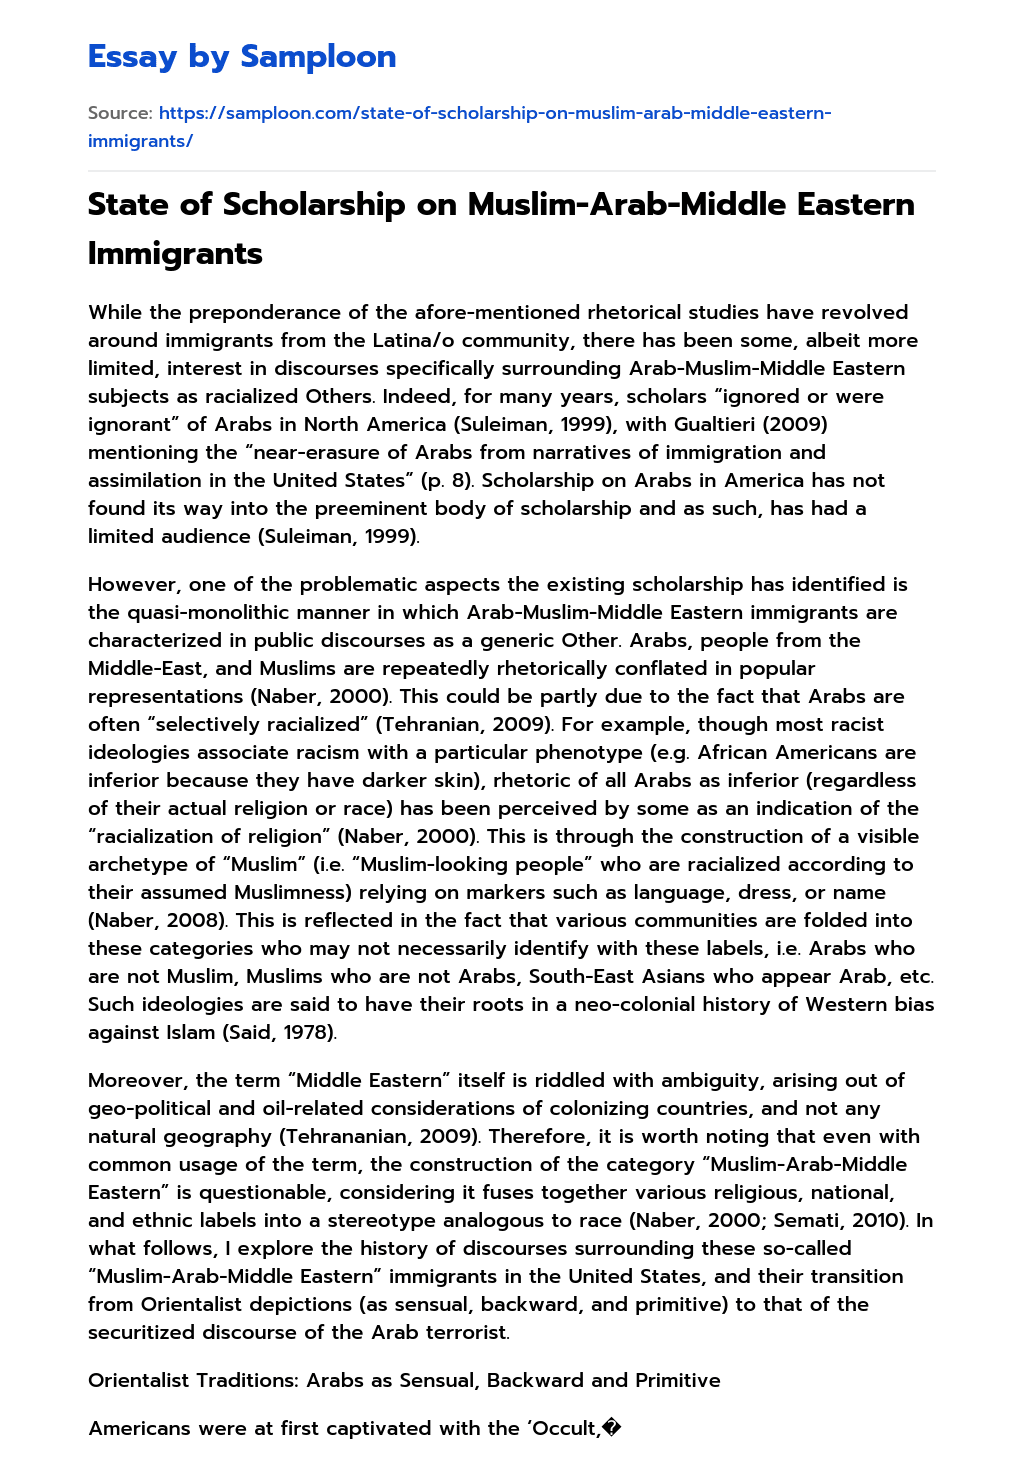 State of Scholarship on Muslim-Arab-Middle Eastern Immigrants essay